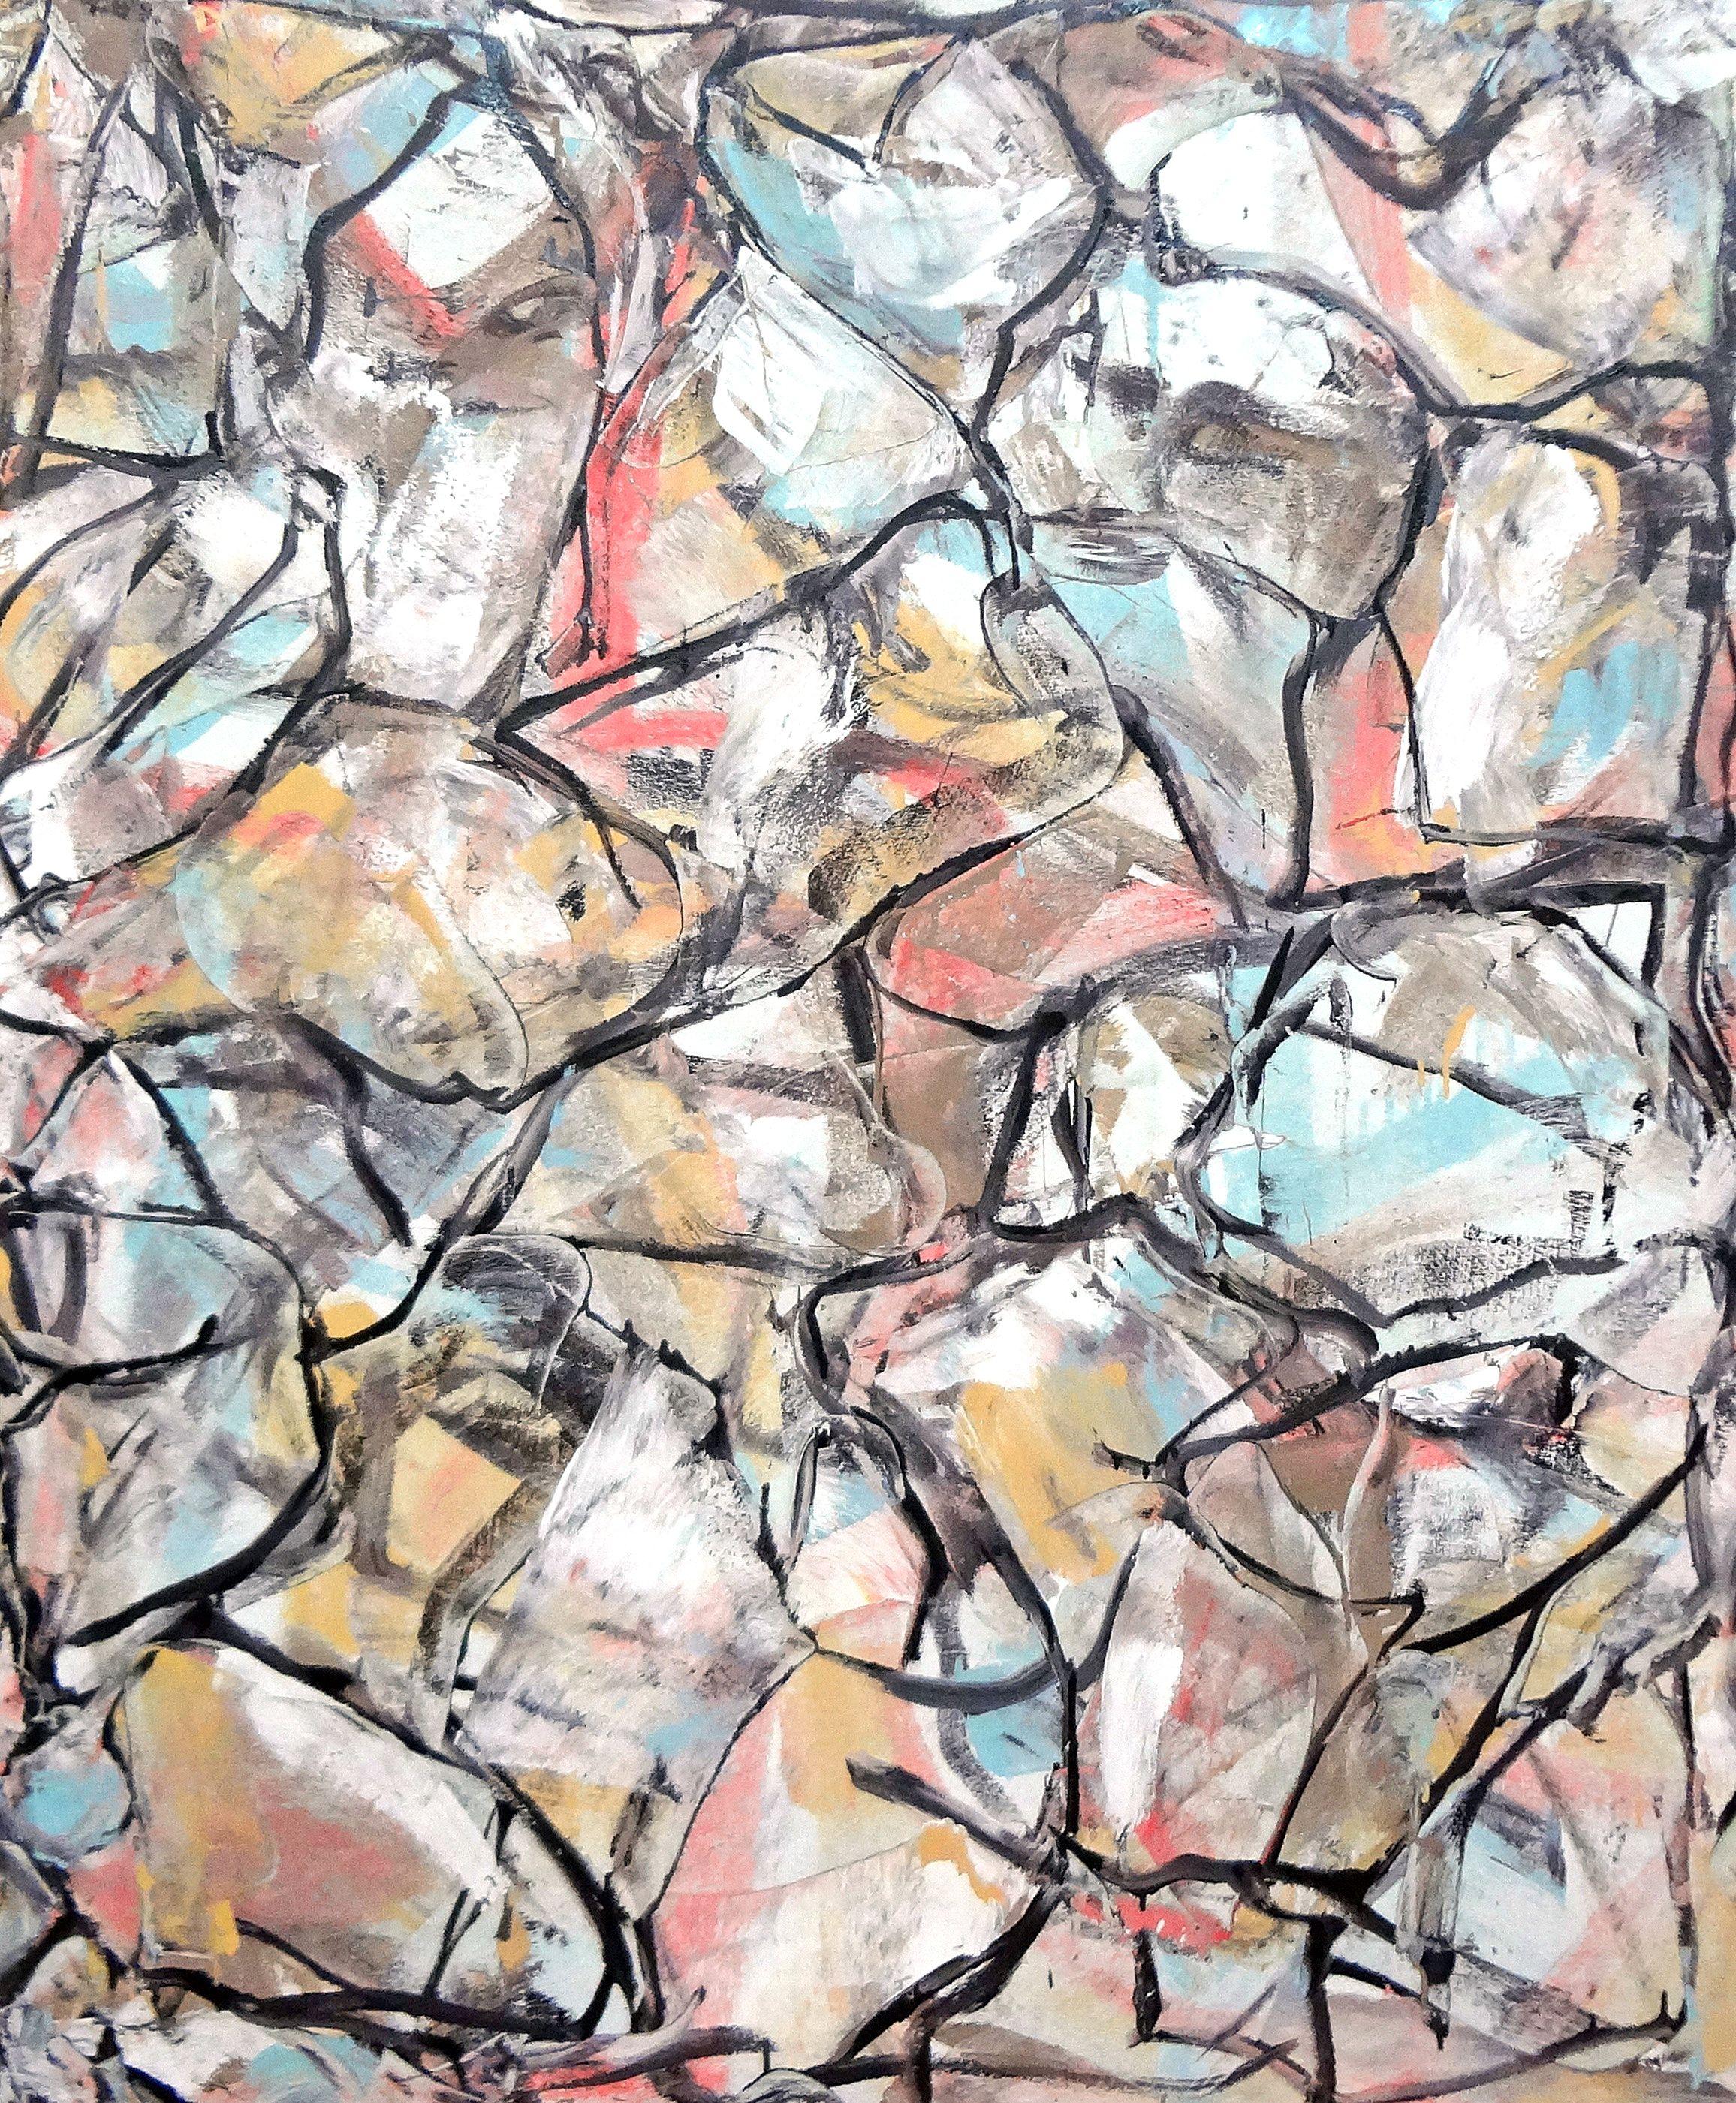 Matthew Dibble Abstract Painting - Street Chain, Painting, Oil on Canvas